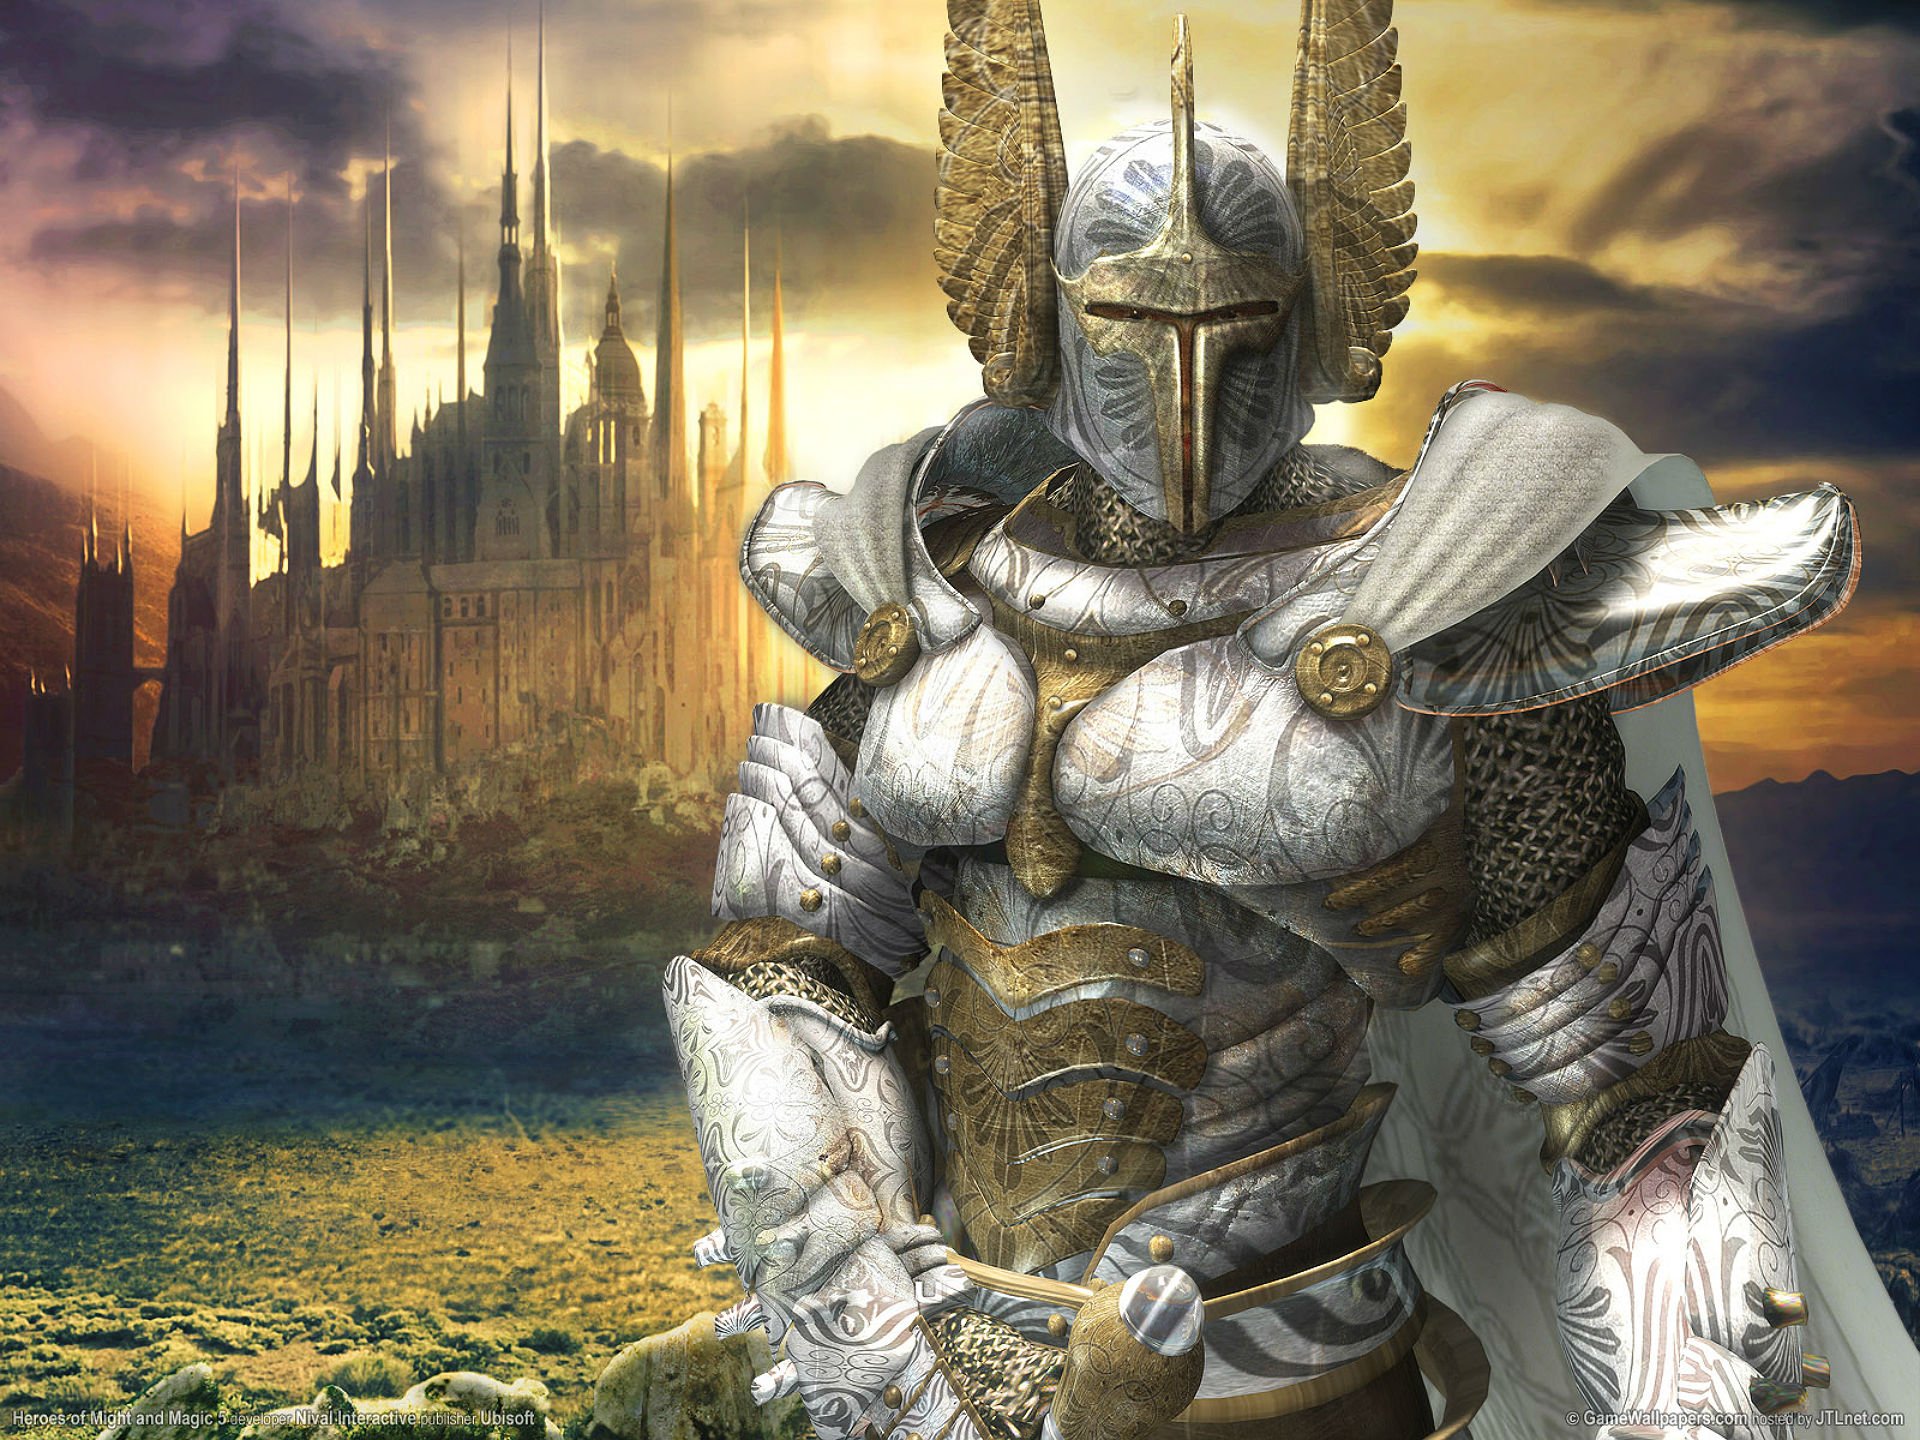 heroes, Might, Magic, Strategy, Fantasy, Fighting, Adventure, Action, Online, 1hmm, Knight, Armor, Warrior, Castle Wallpaper